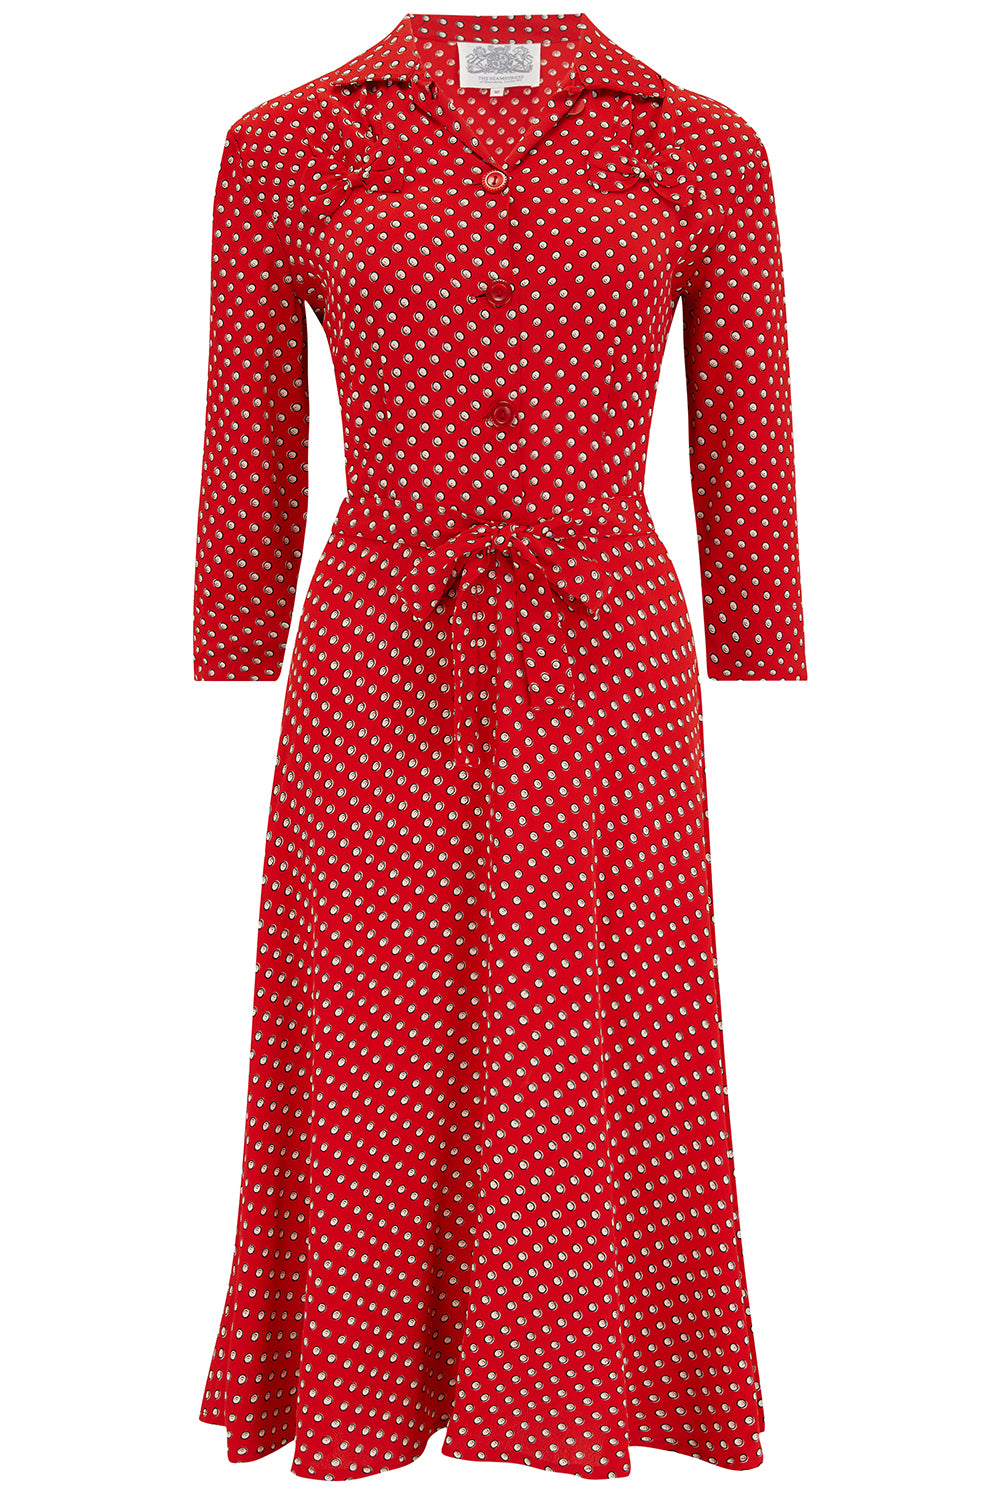 Polly Dress CC41 in Red Ditzy , Classic 1940s True Vintage Style – Rock ...